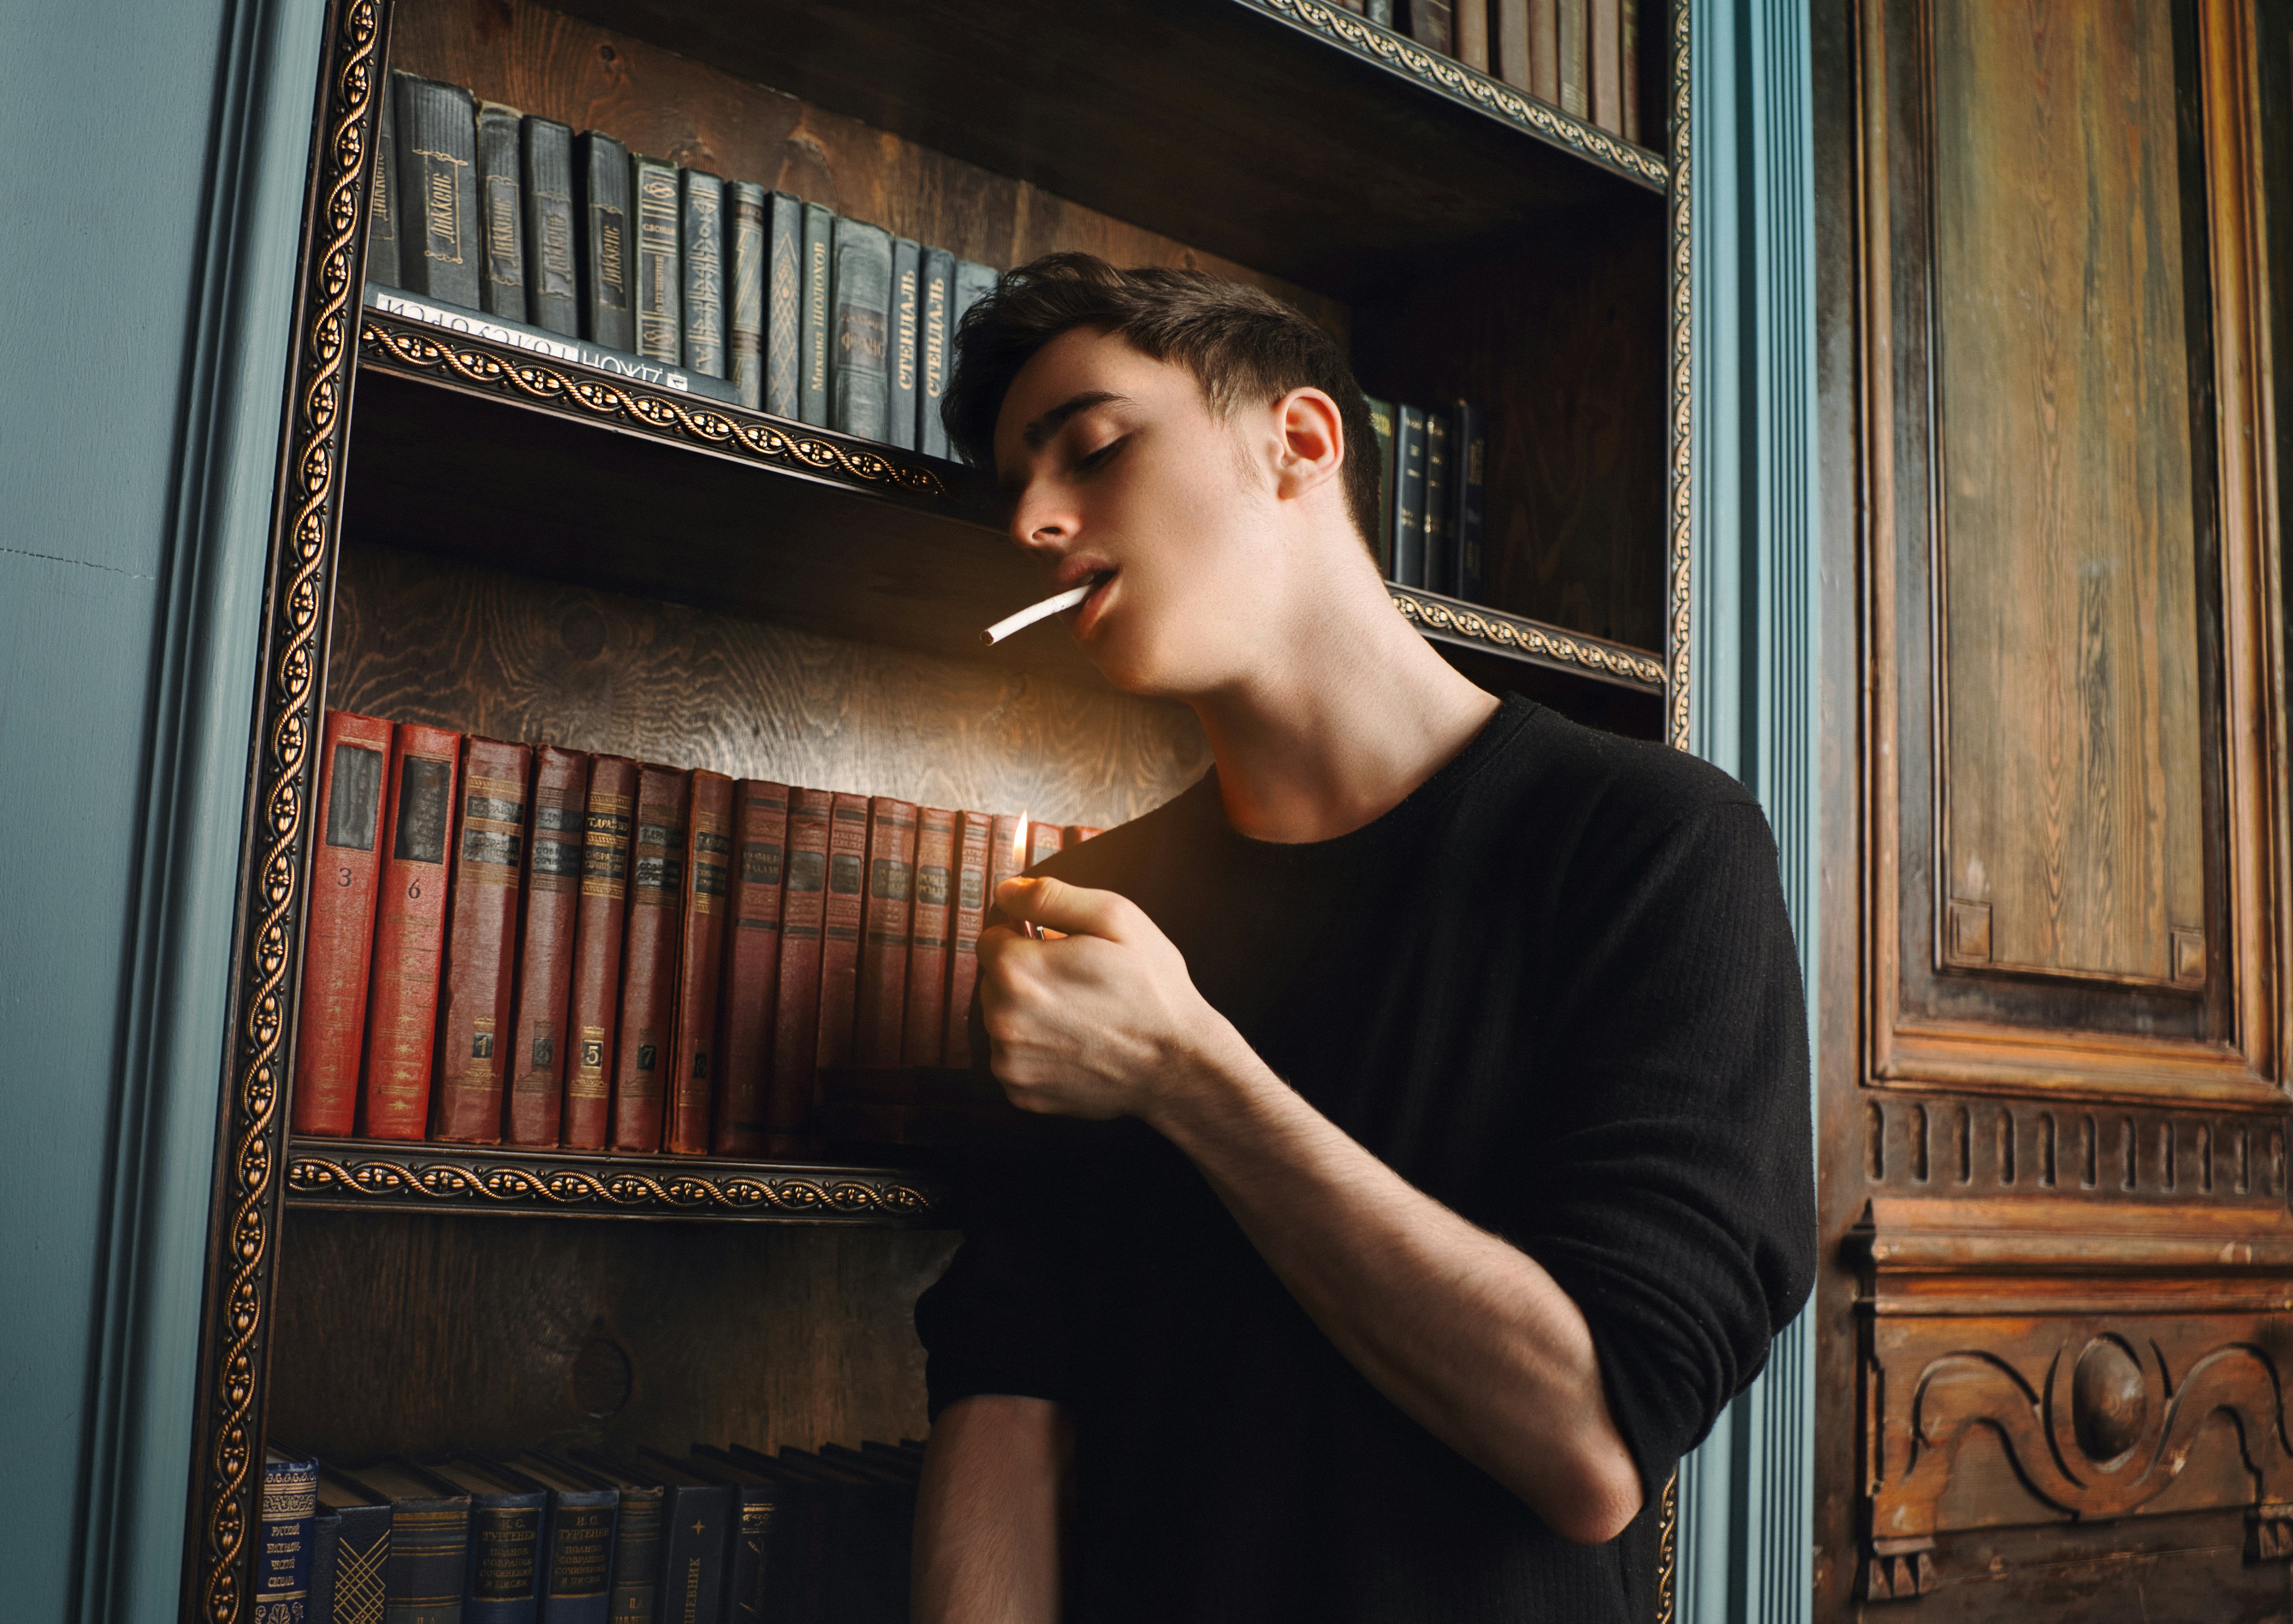 A young student is smoking in the reading room Photographer: https://www.instagram.com/aginsbrook/ Model: https://www.instagram.com/schweppes_psina/